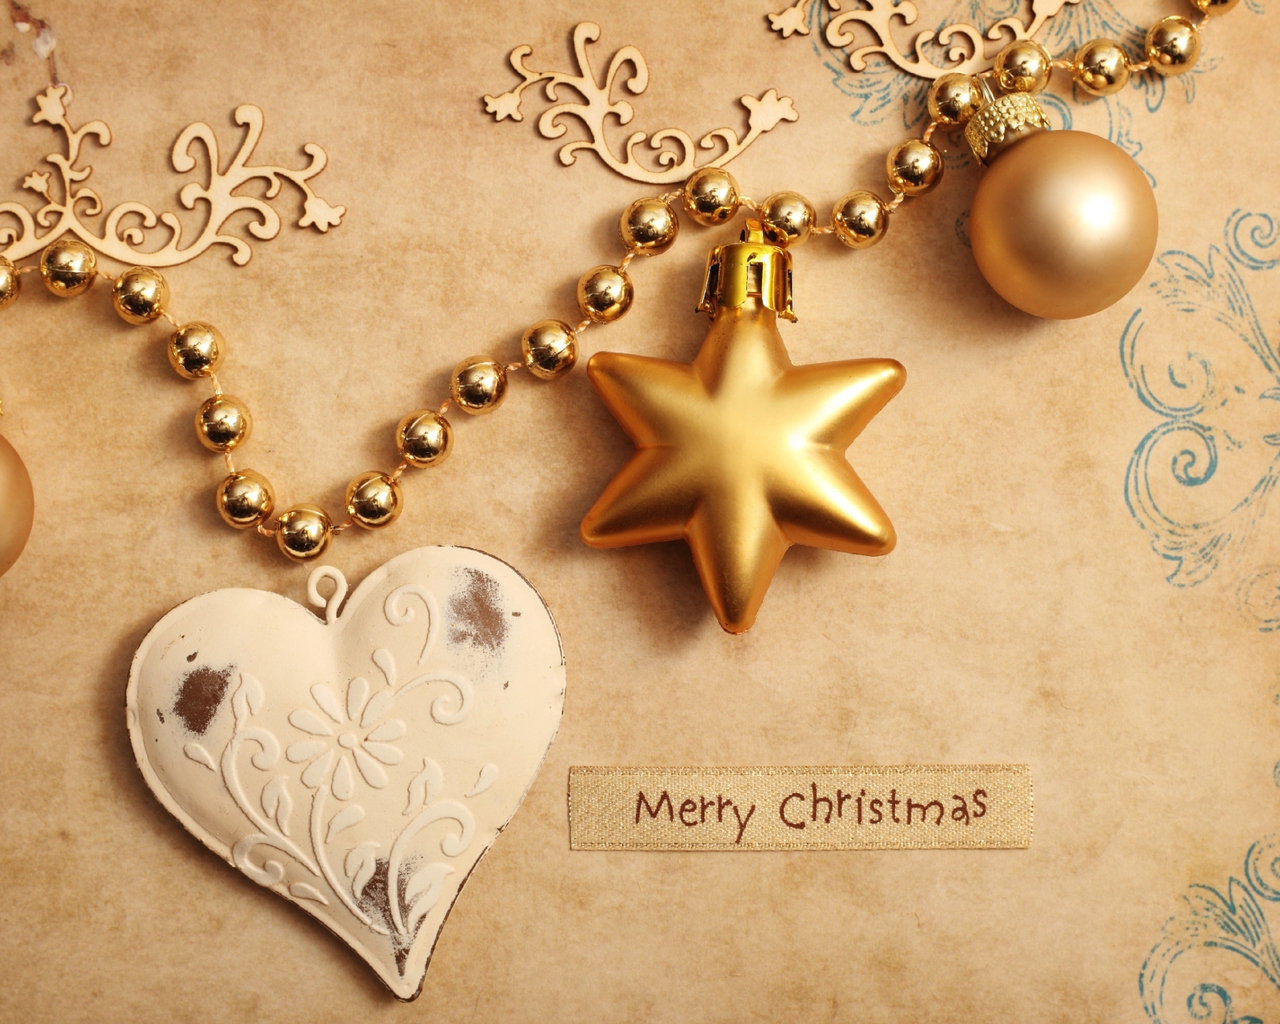 Merry Christmas Card for 1280 x 1024 resolution